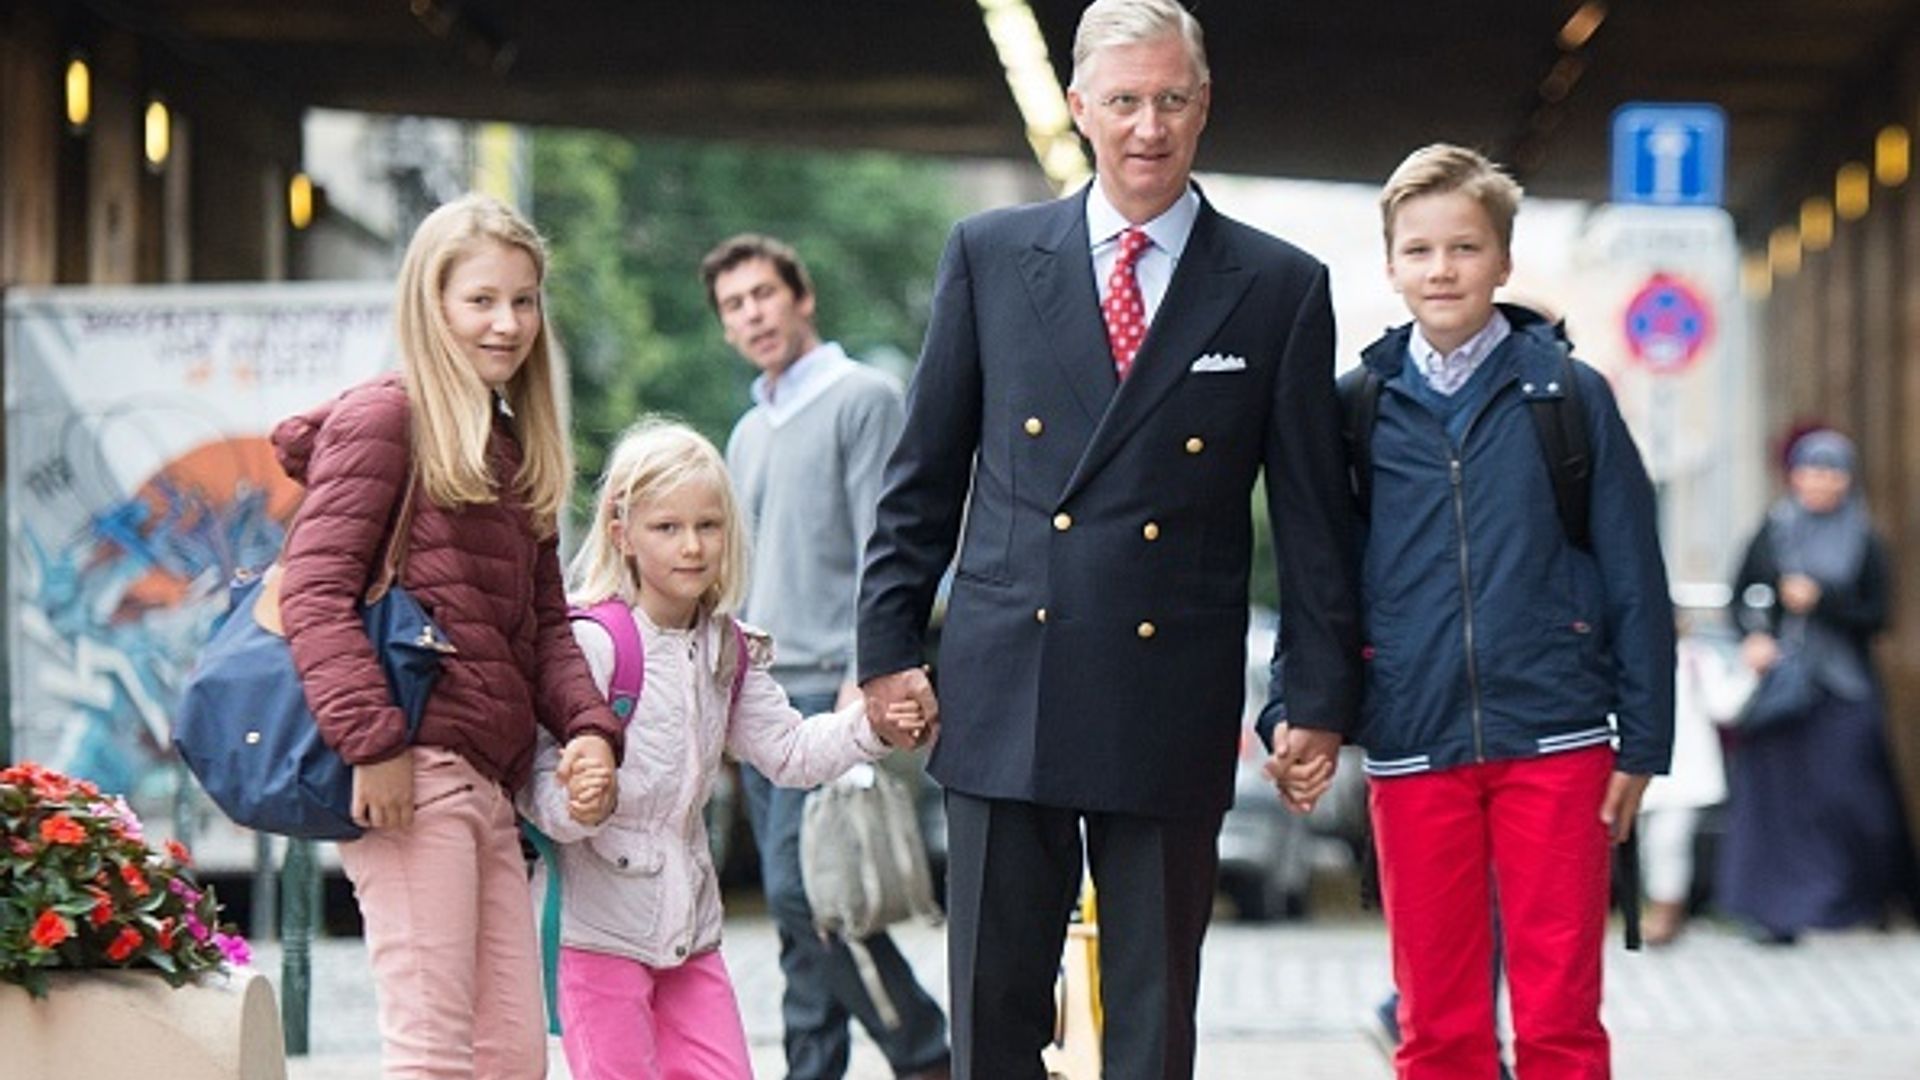 Belgium's King Philippe brings kids to first day of school